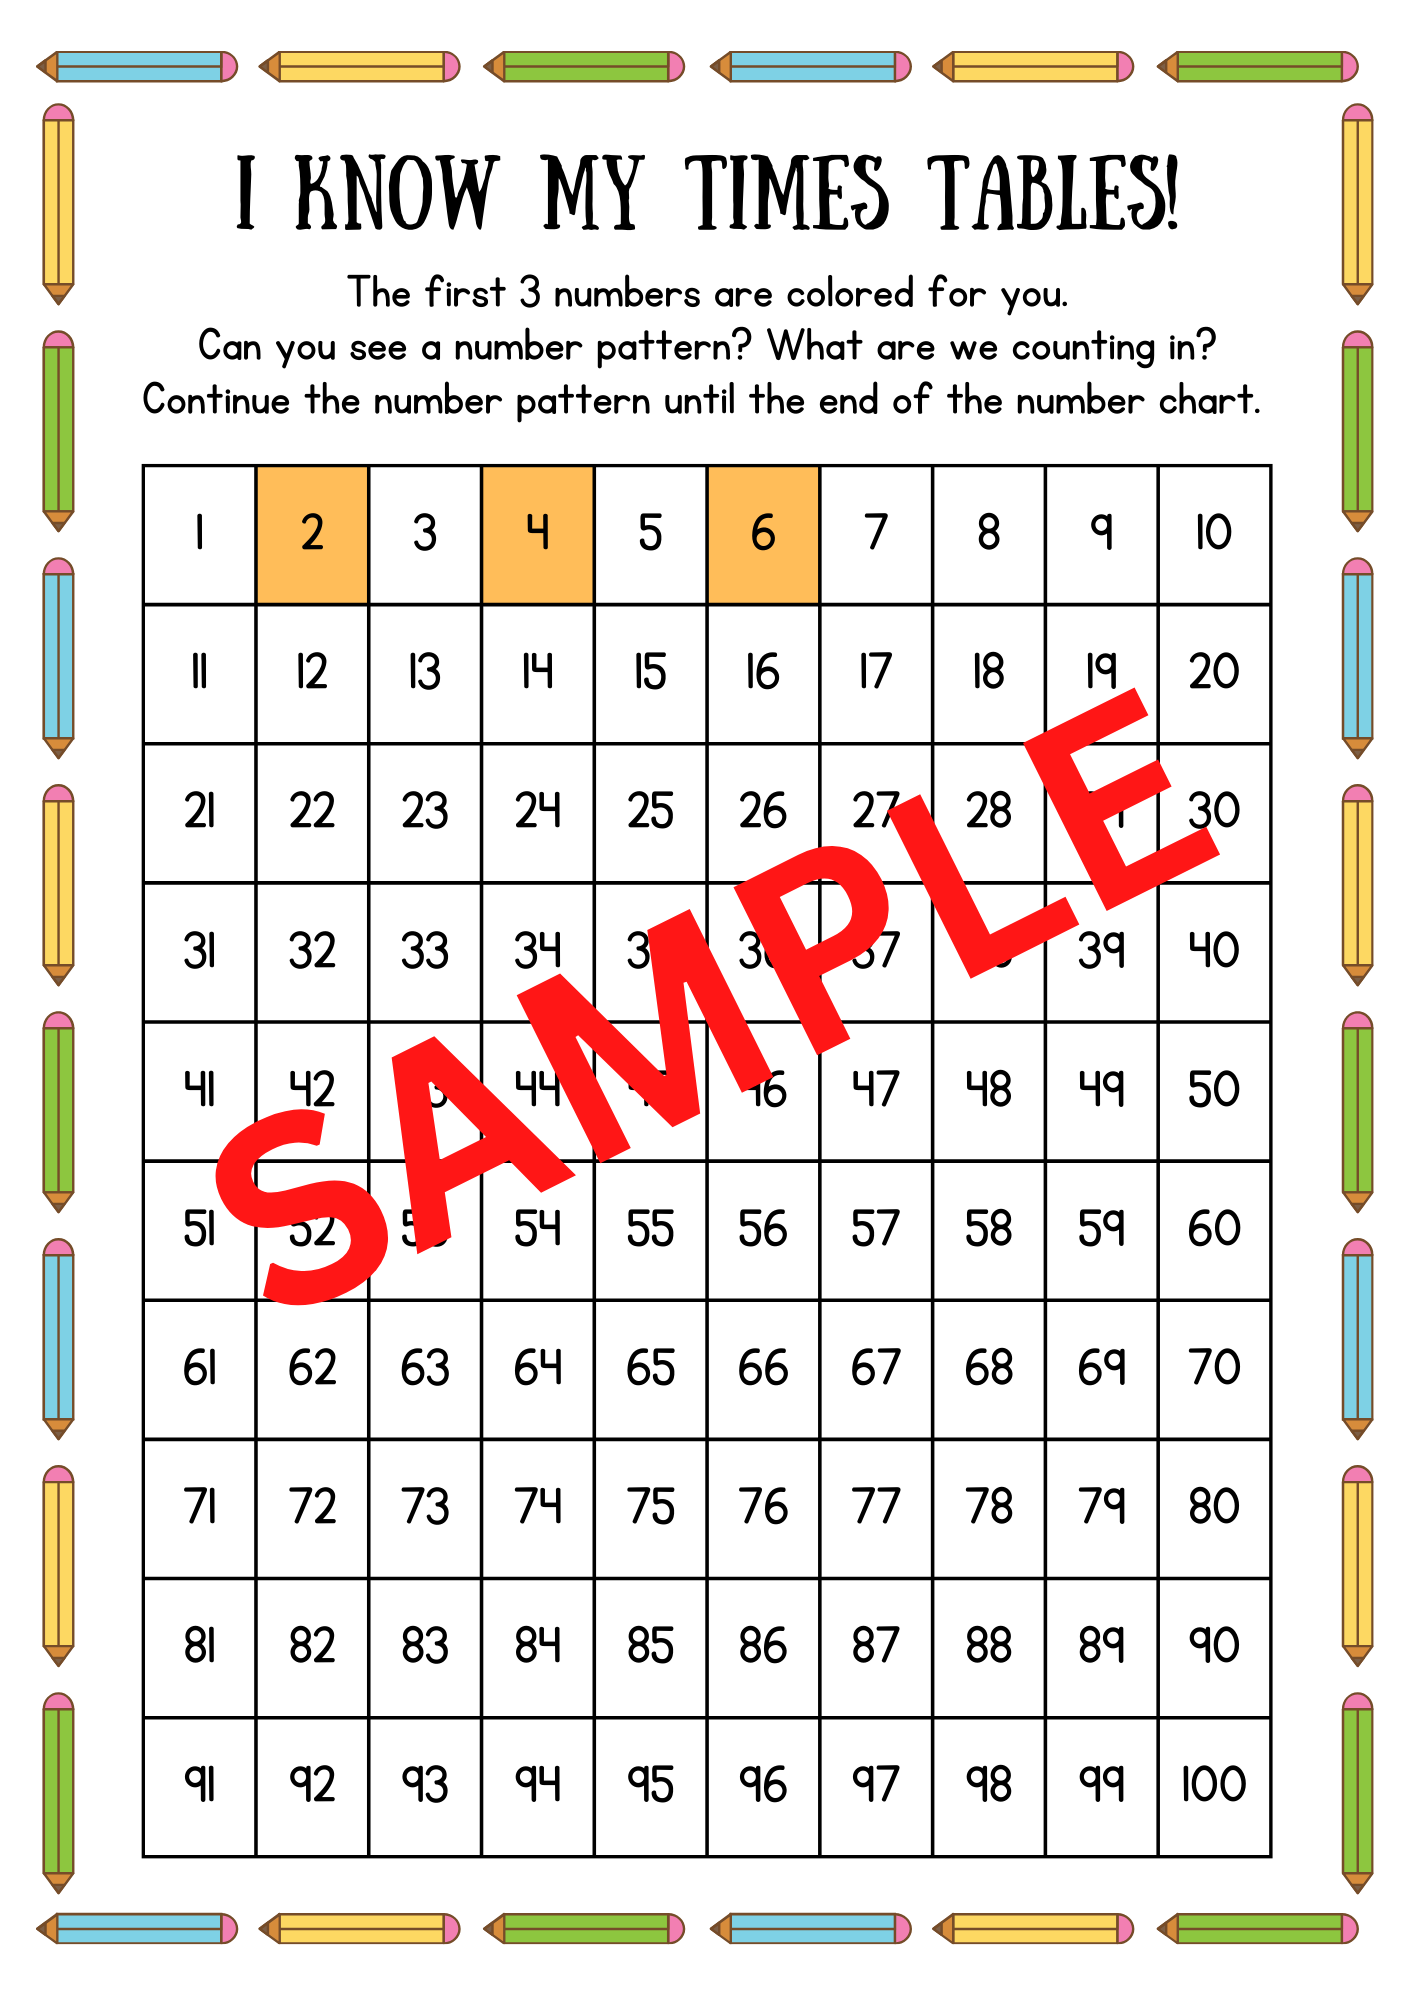 Times Tables Mastery Grids: Interactive Practice from 2 to 12